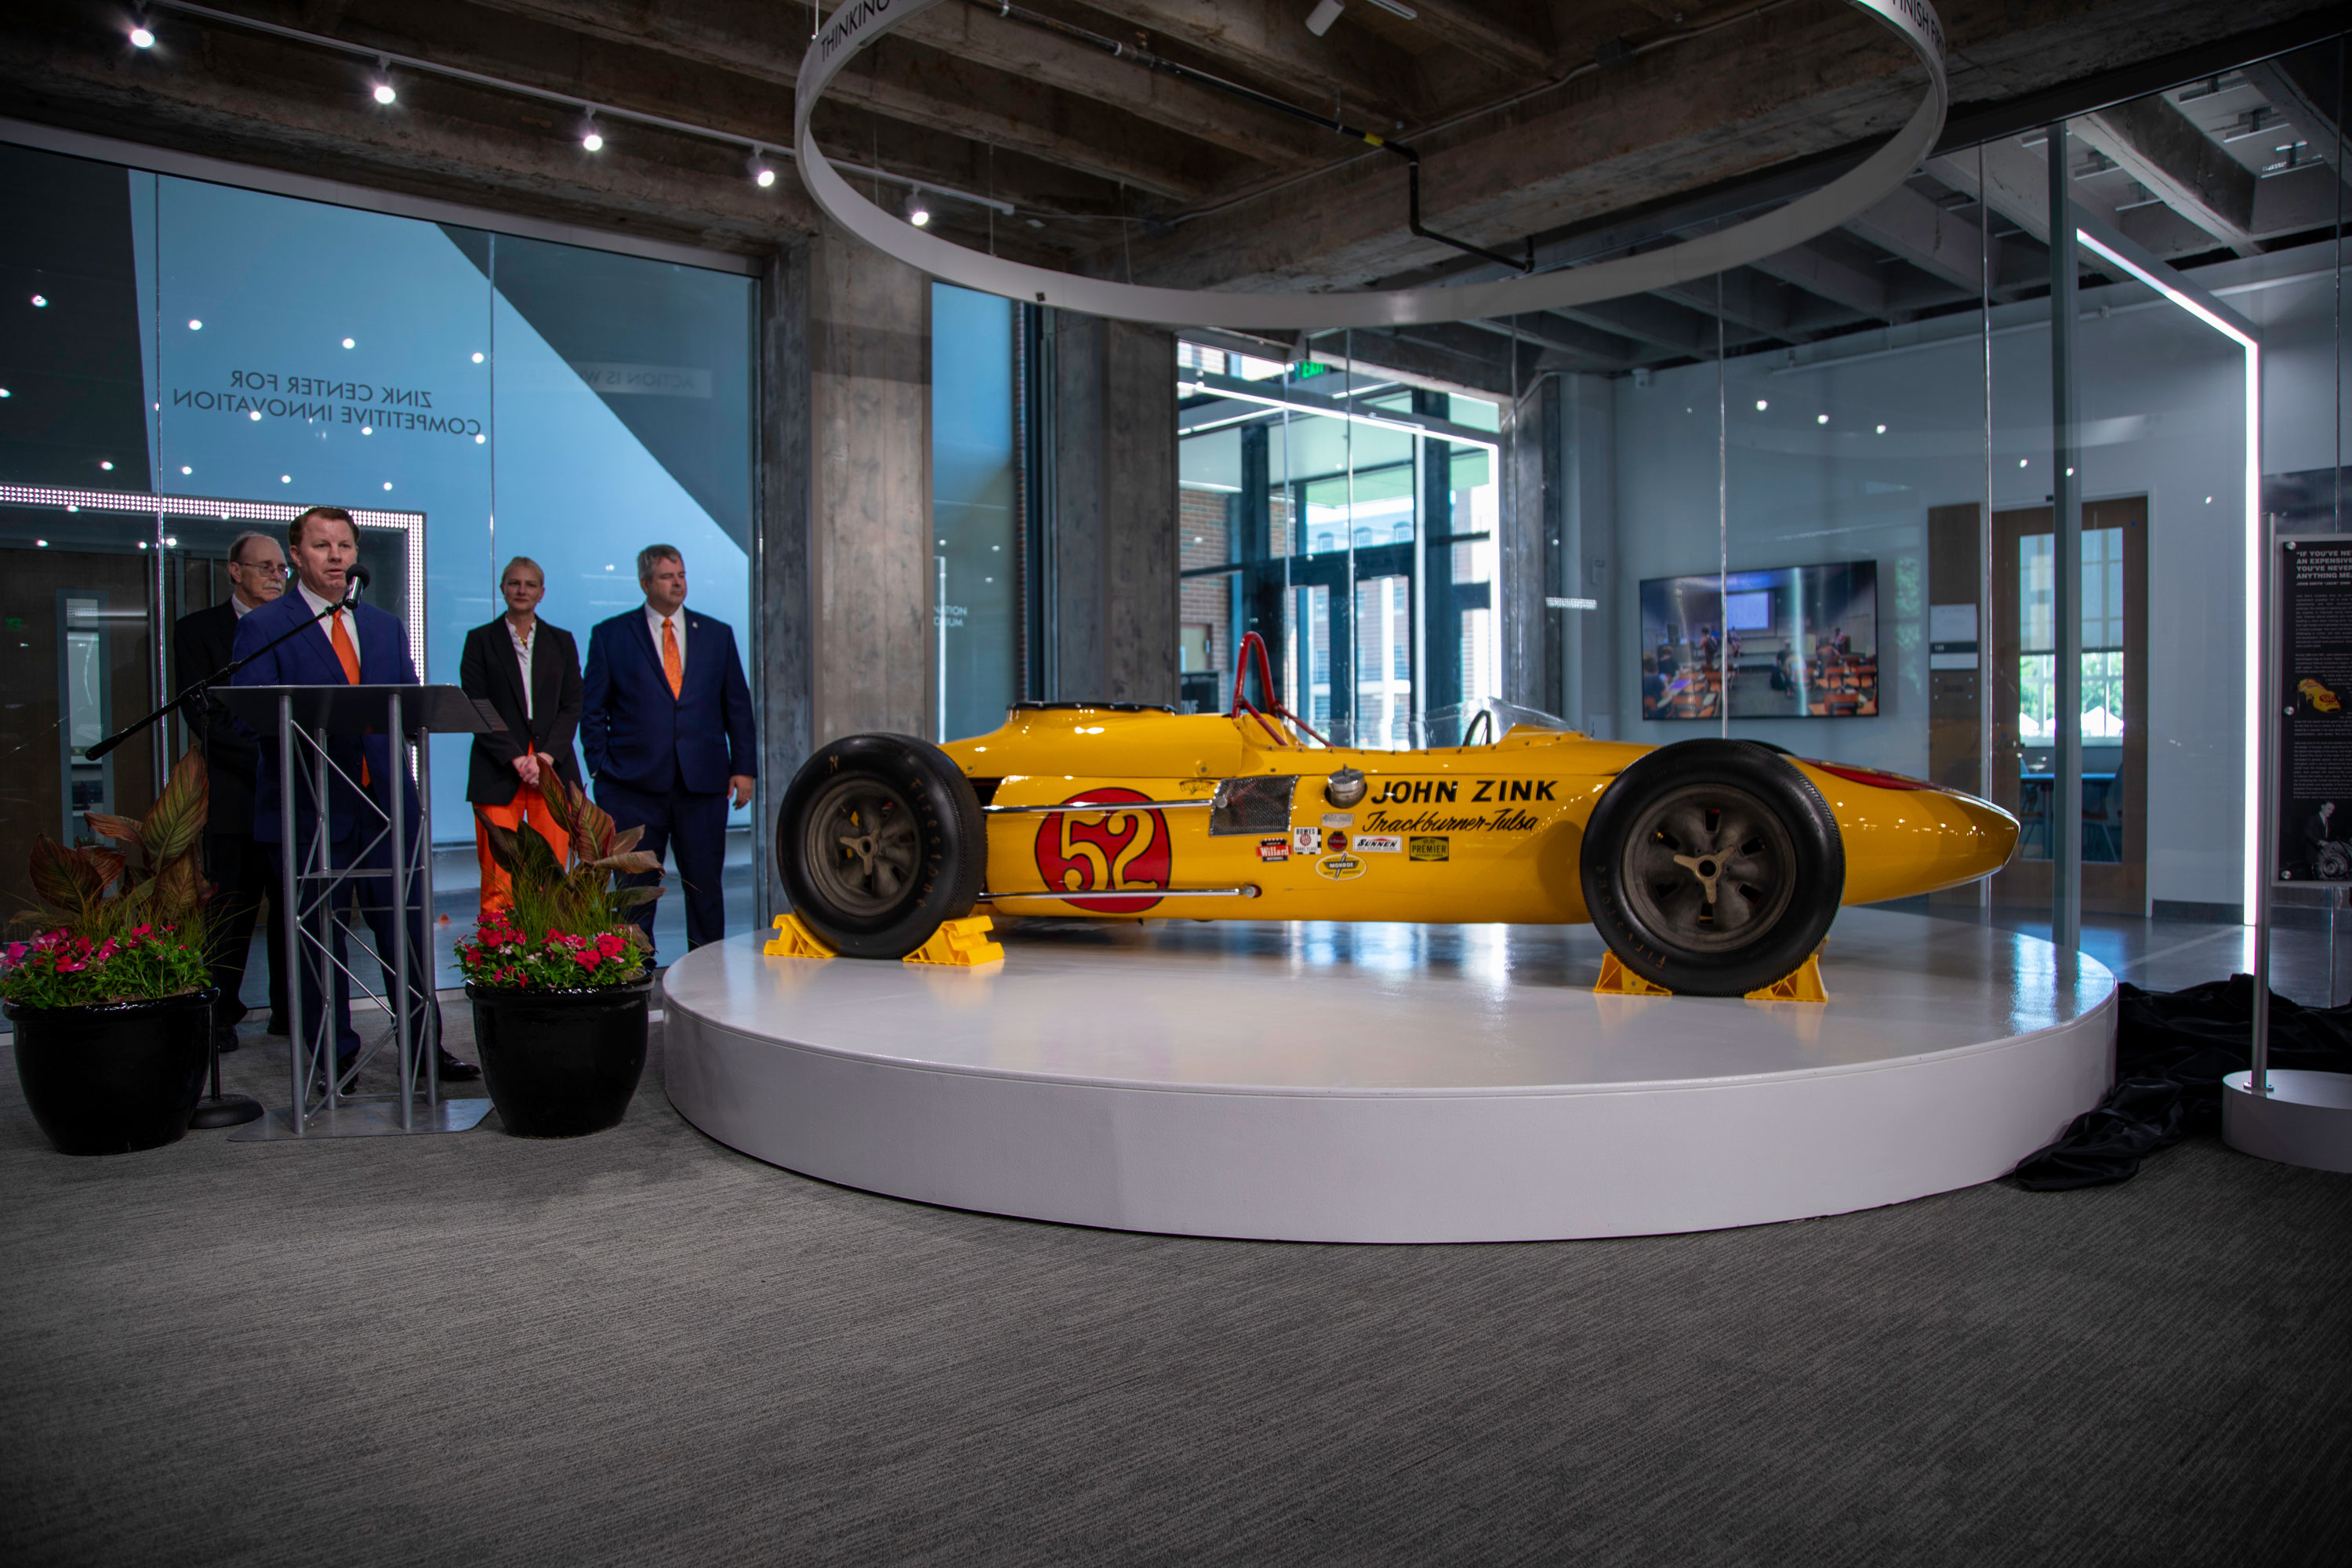 A symbol of Oklahoma ingenuity, the John Zink Trackburner Indy-style racing car will be on display in the Zink Center for Competitive Innovation.